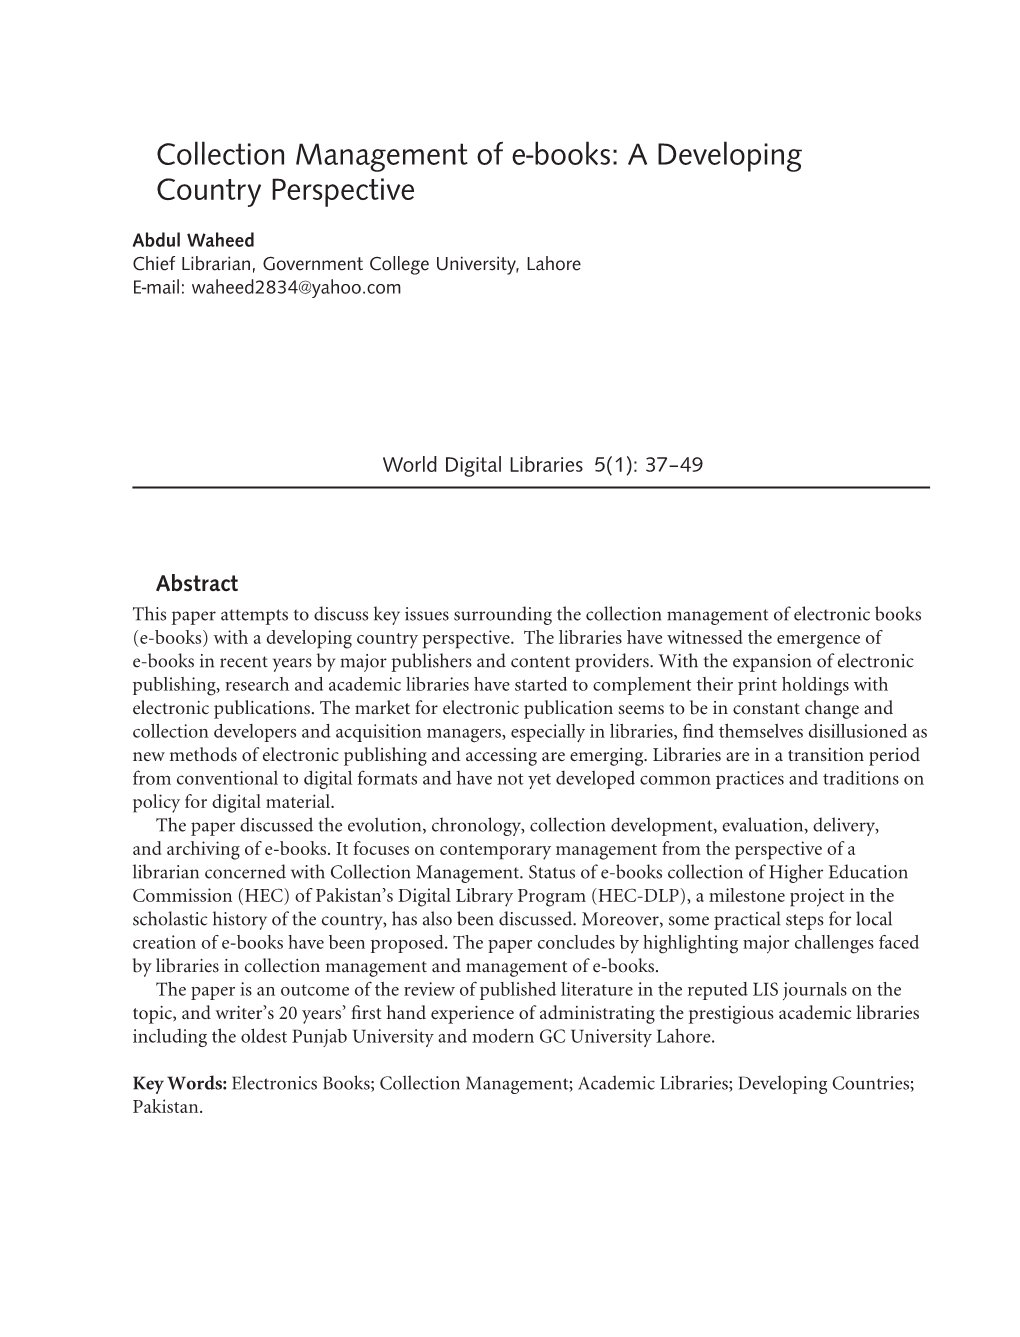 Collection Management of E-Books: a Developing Country Perspective